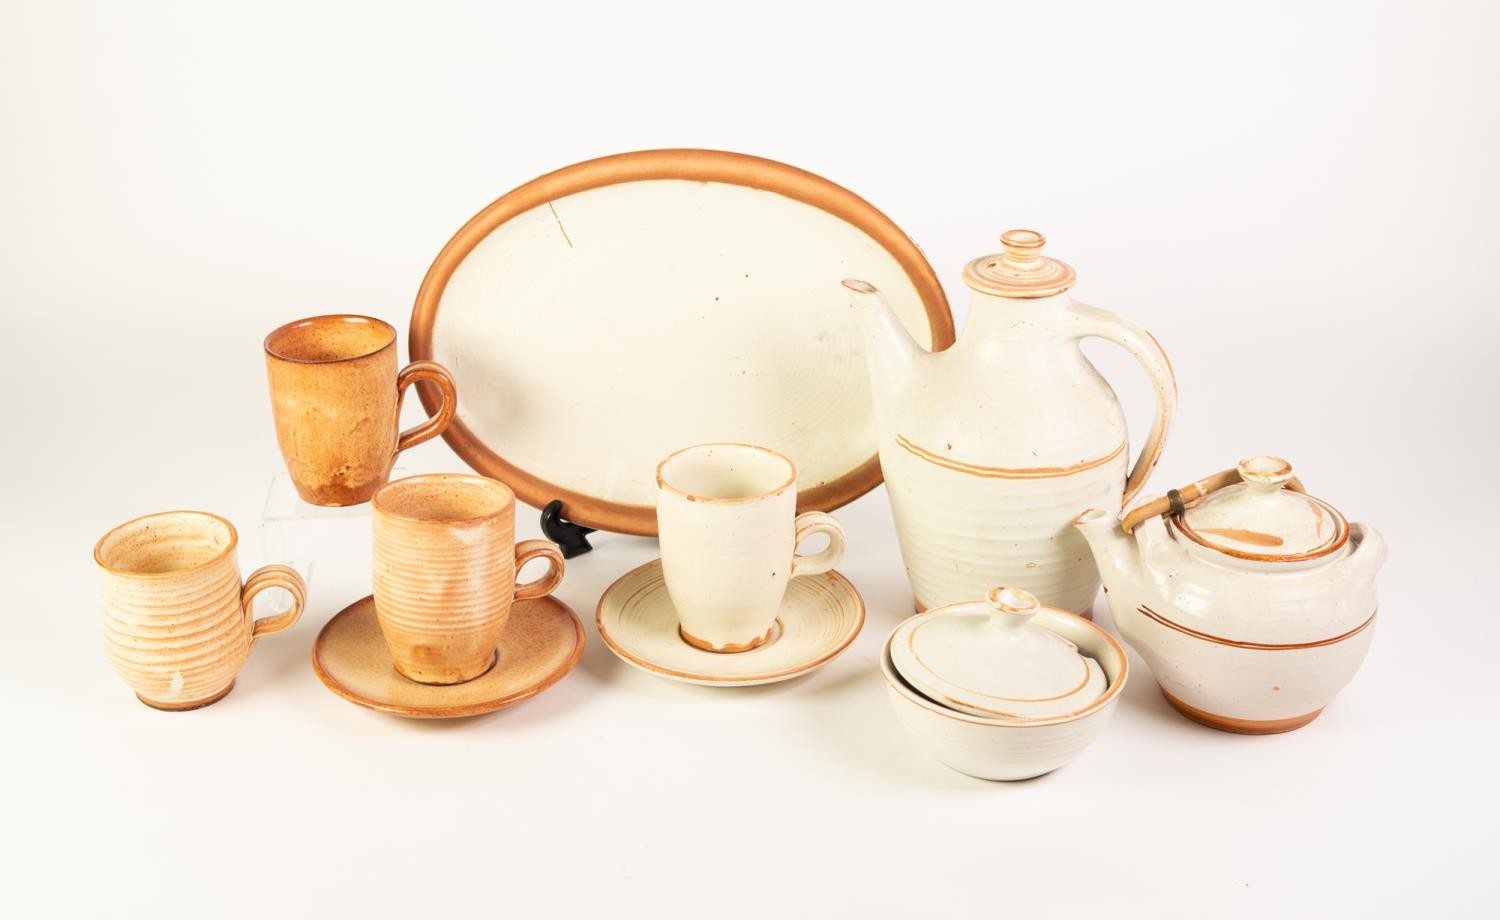 TEN PIECES OF DAVID LEACH STYLE POTTERY WITH THICK WHITE GLAZE, comprising: TEA KETTLE, COFFEE